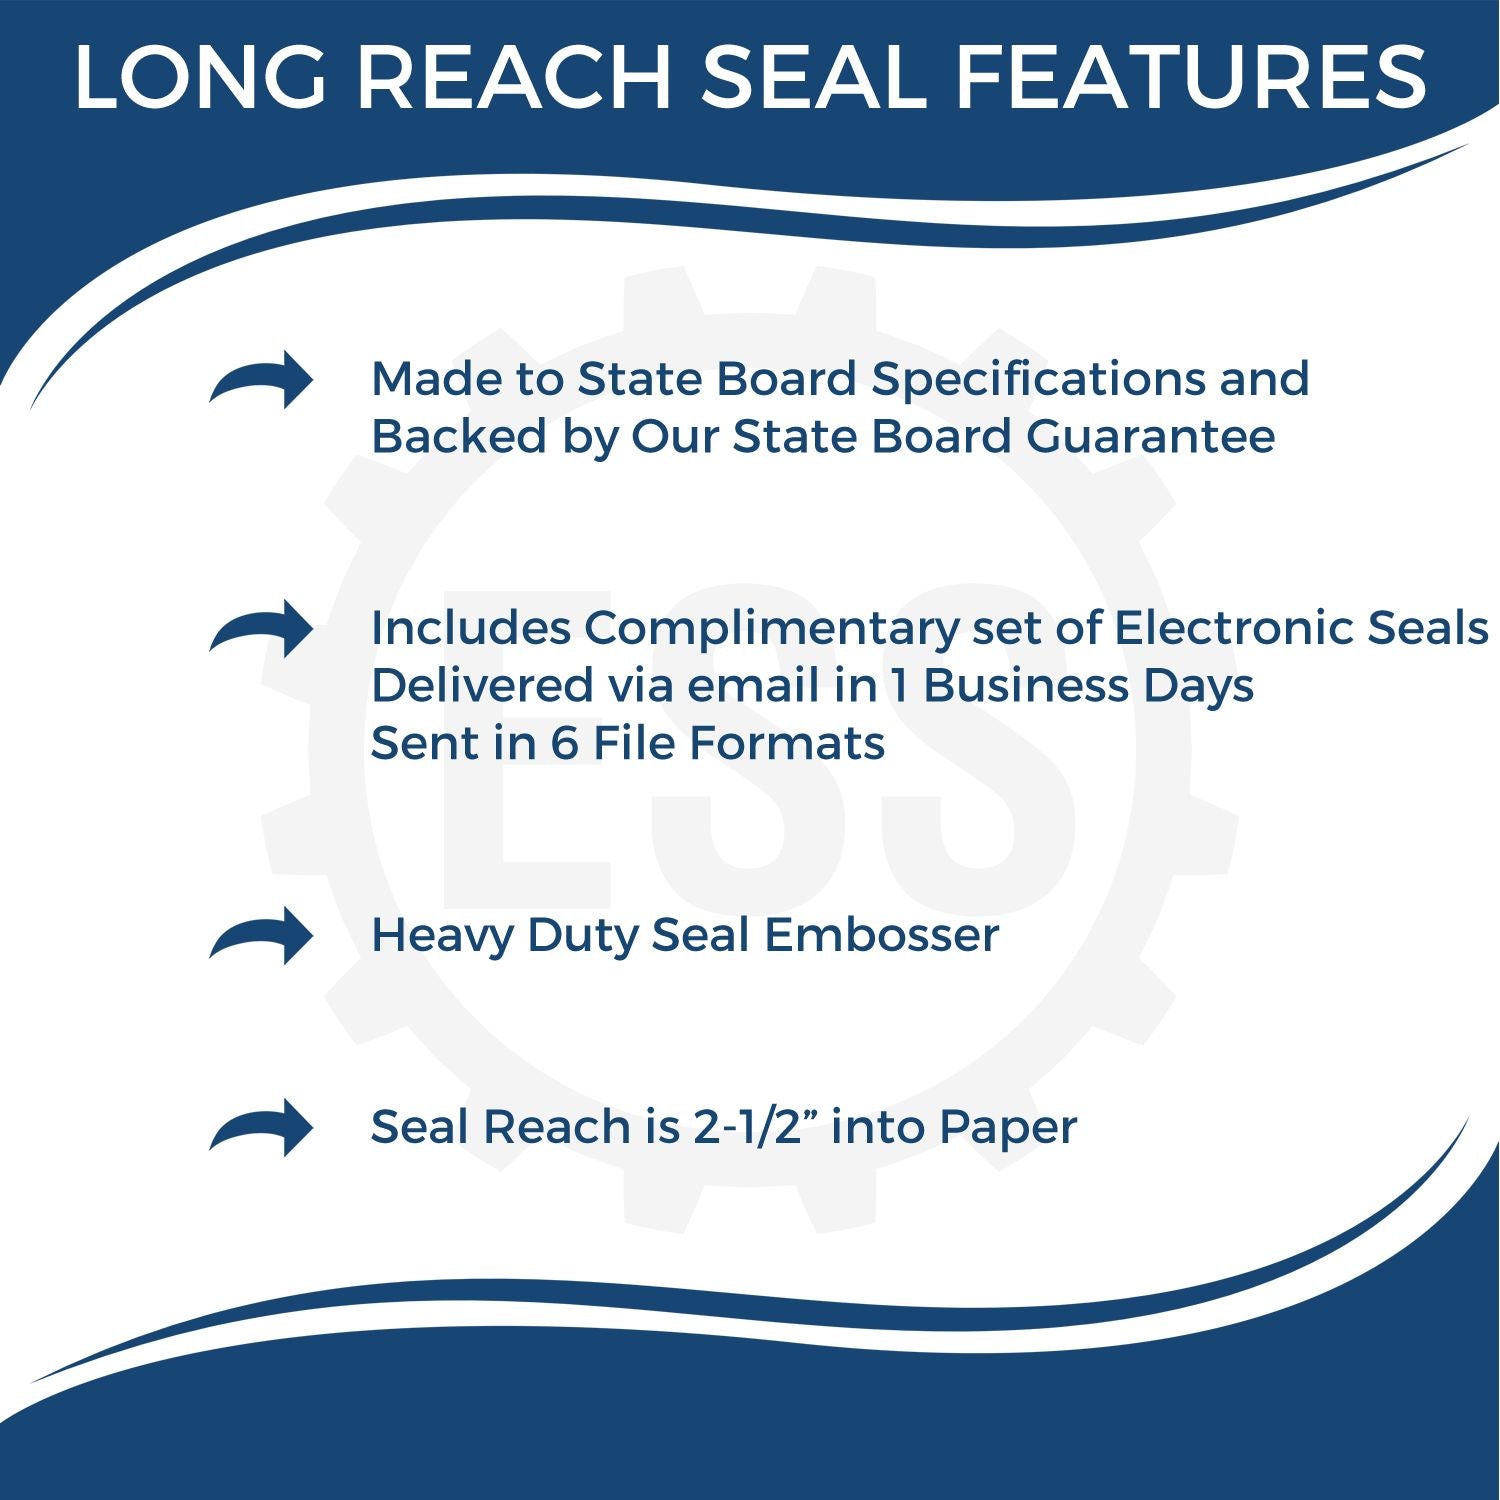 The main image for the Long Reach Tennessee PE Seal depicting a sample of the imprint and electronic files